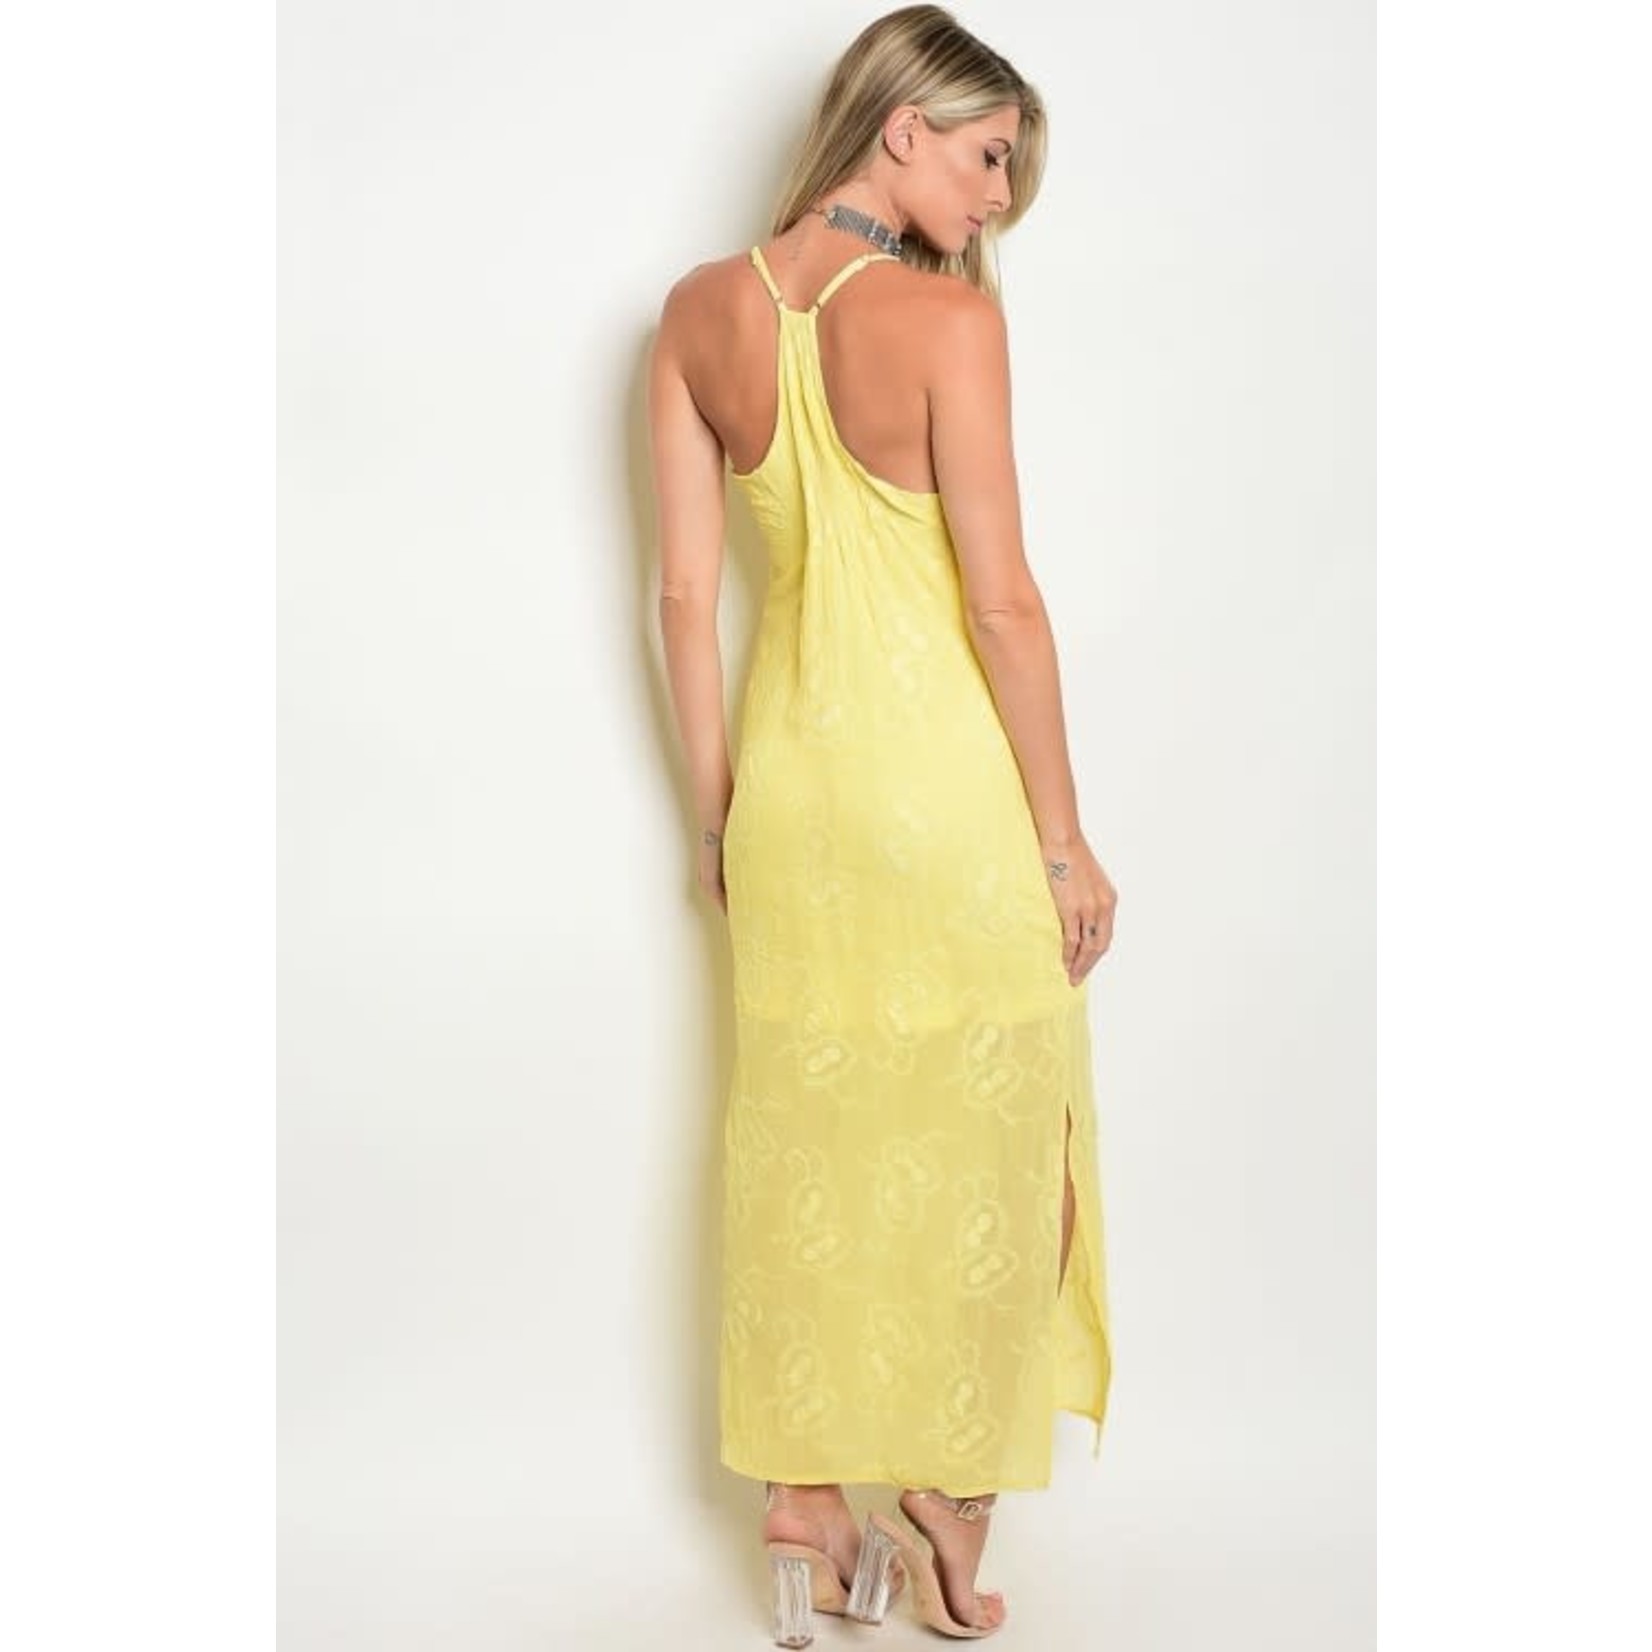 One Plus One Fashion Yellow Embroidered Formal Long Dress